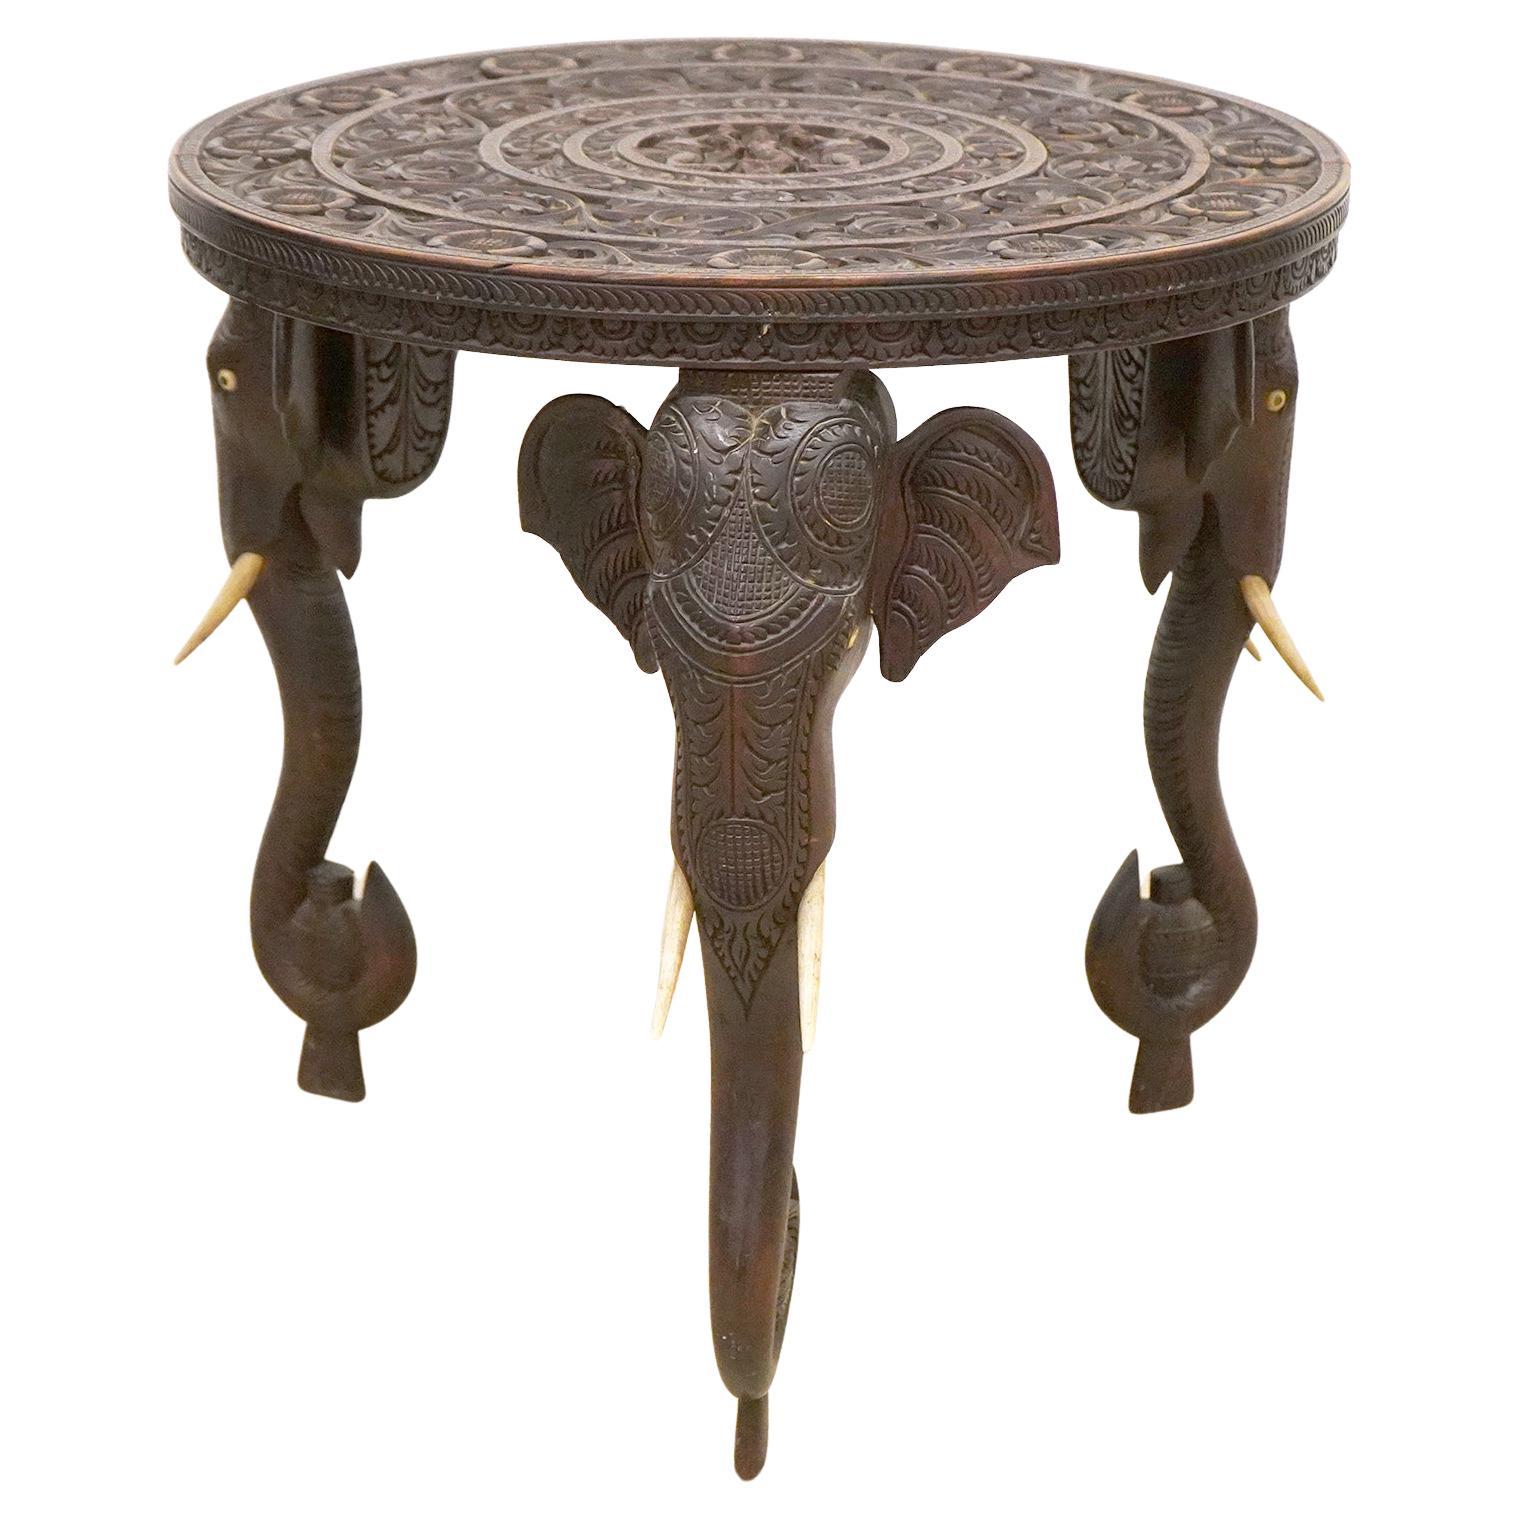 19th C. Anglo Indian Well Carved Side Table Supported by Three Elephant Heads